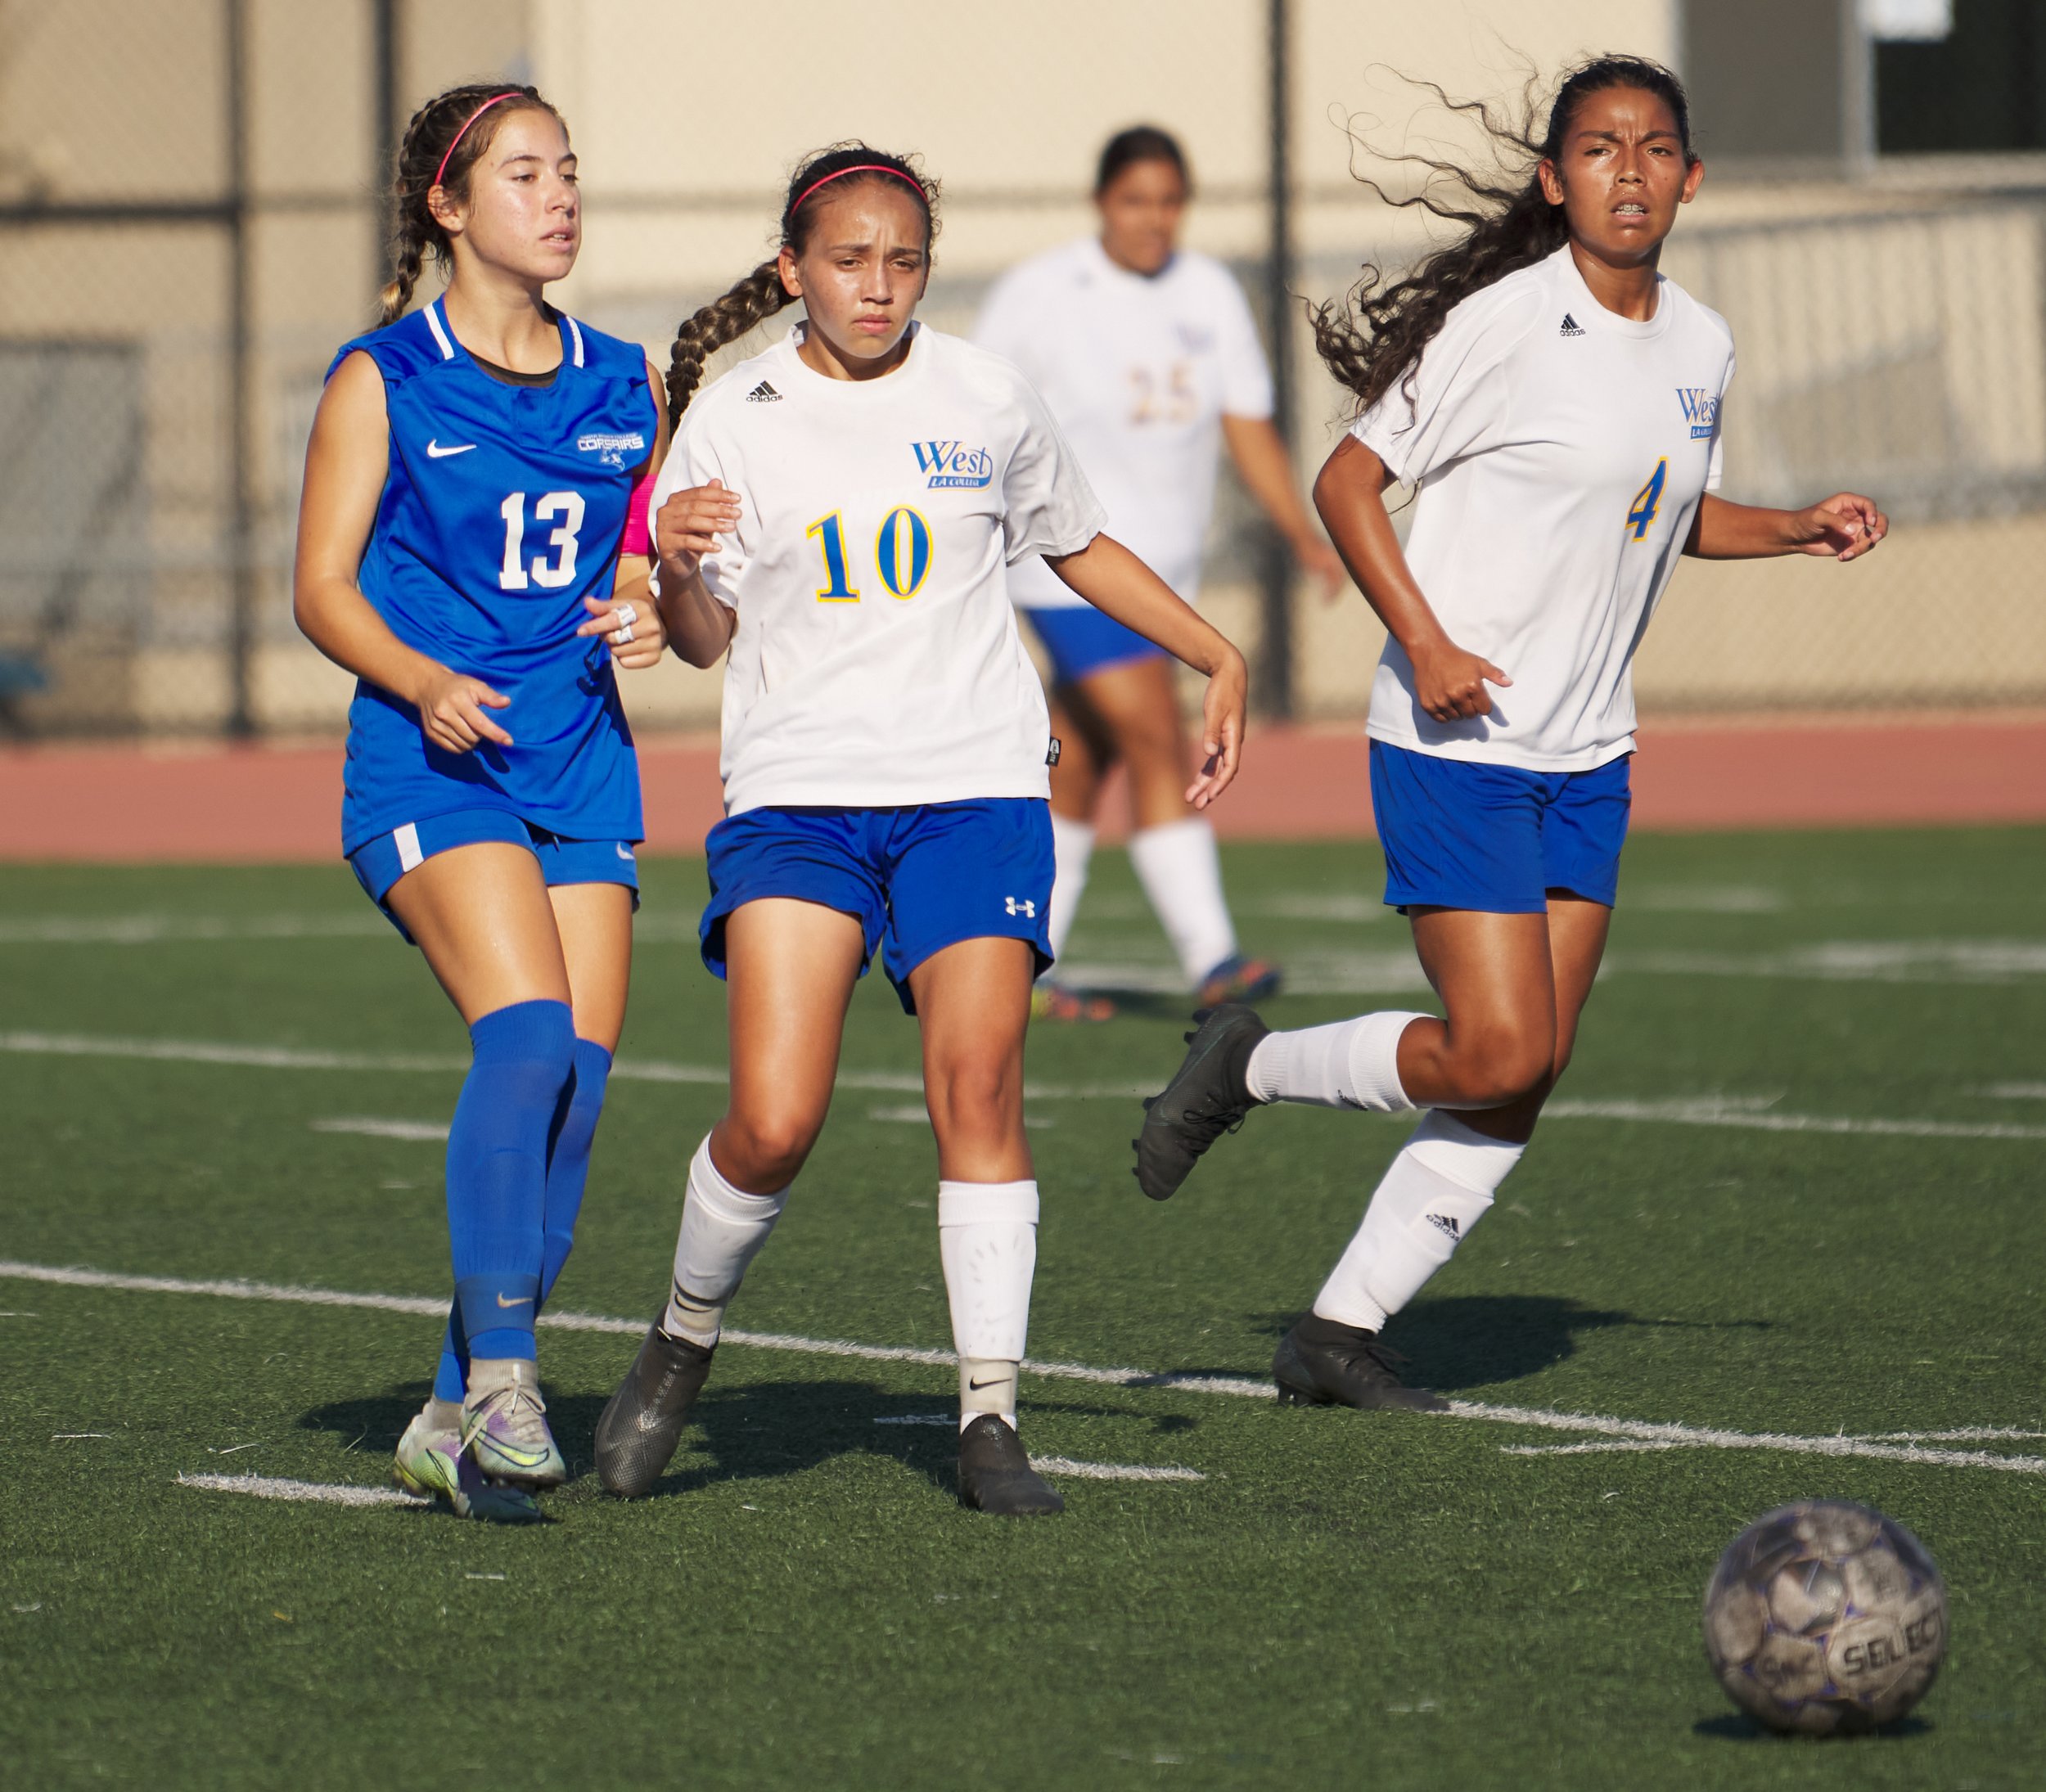  West Los Angeles College Wildcats' Leslie Flores (center), with Mary Godinez (right), fails to steal the ball from Sophie Doumitt (left), of the Santa Monica College Corsairs, at the women's soccer match on Friday, Sept. 30, 2022, at Corsair Field i